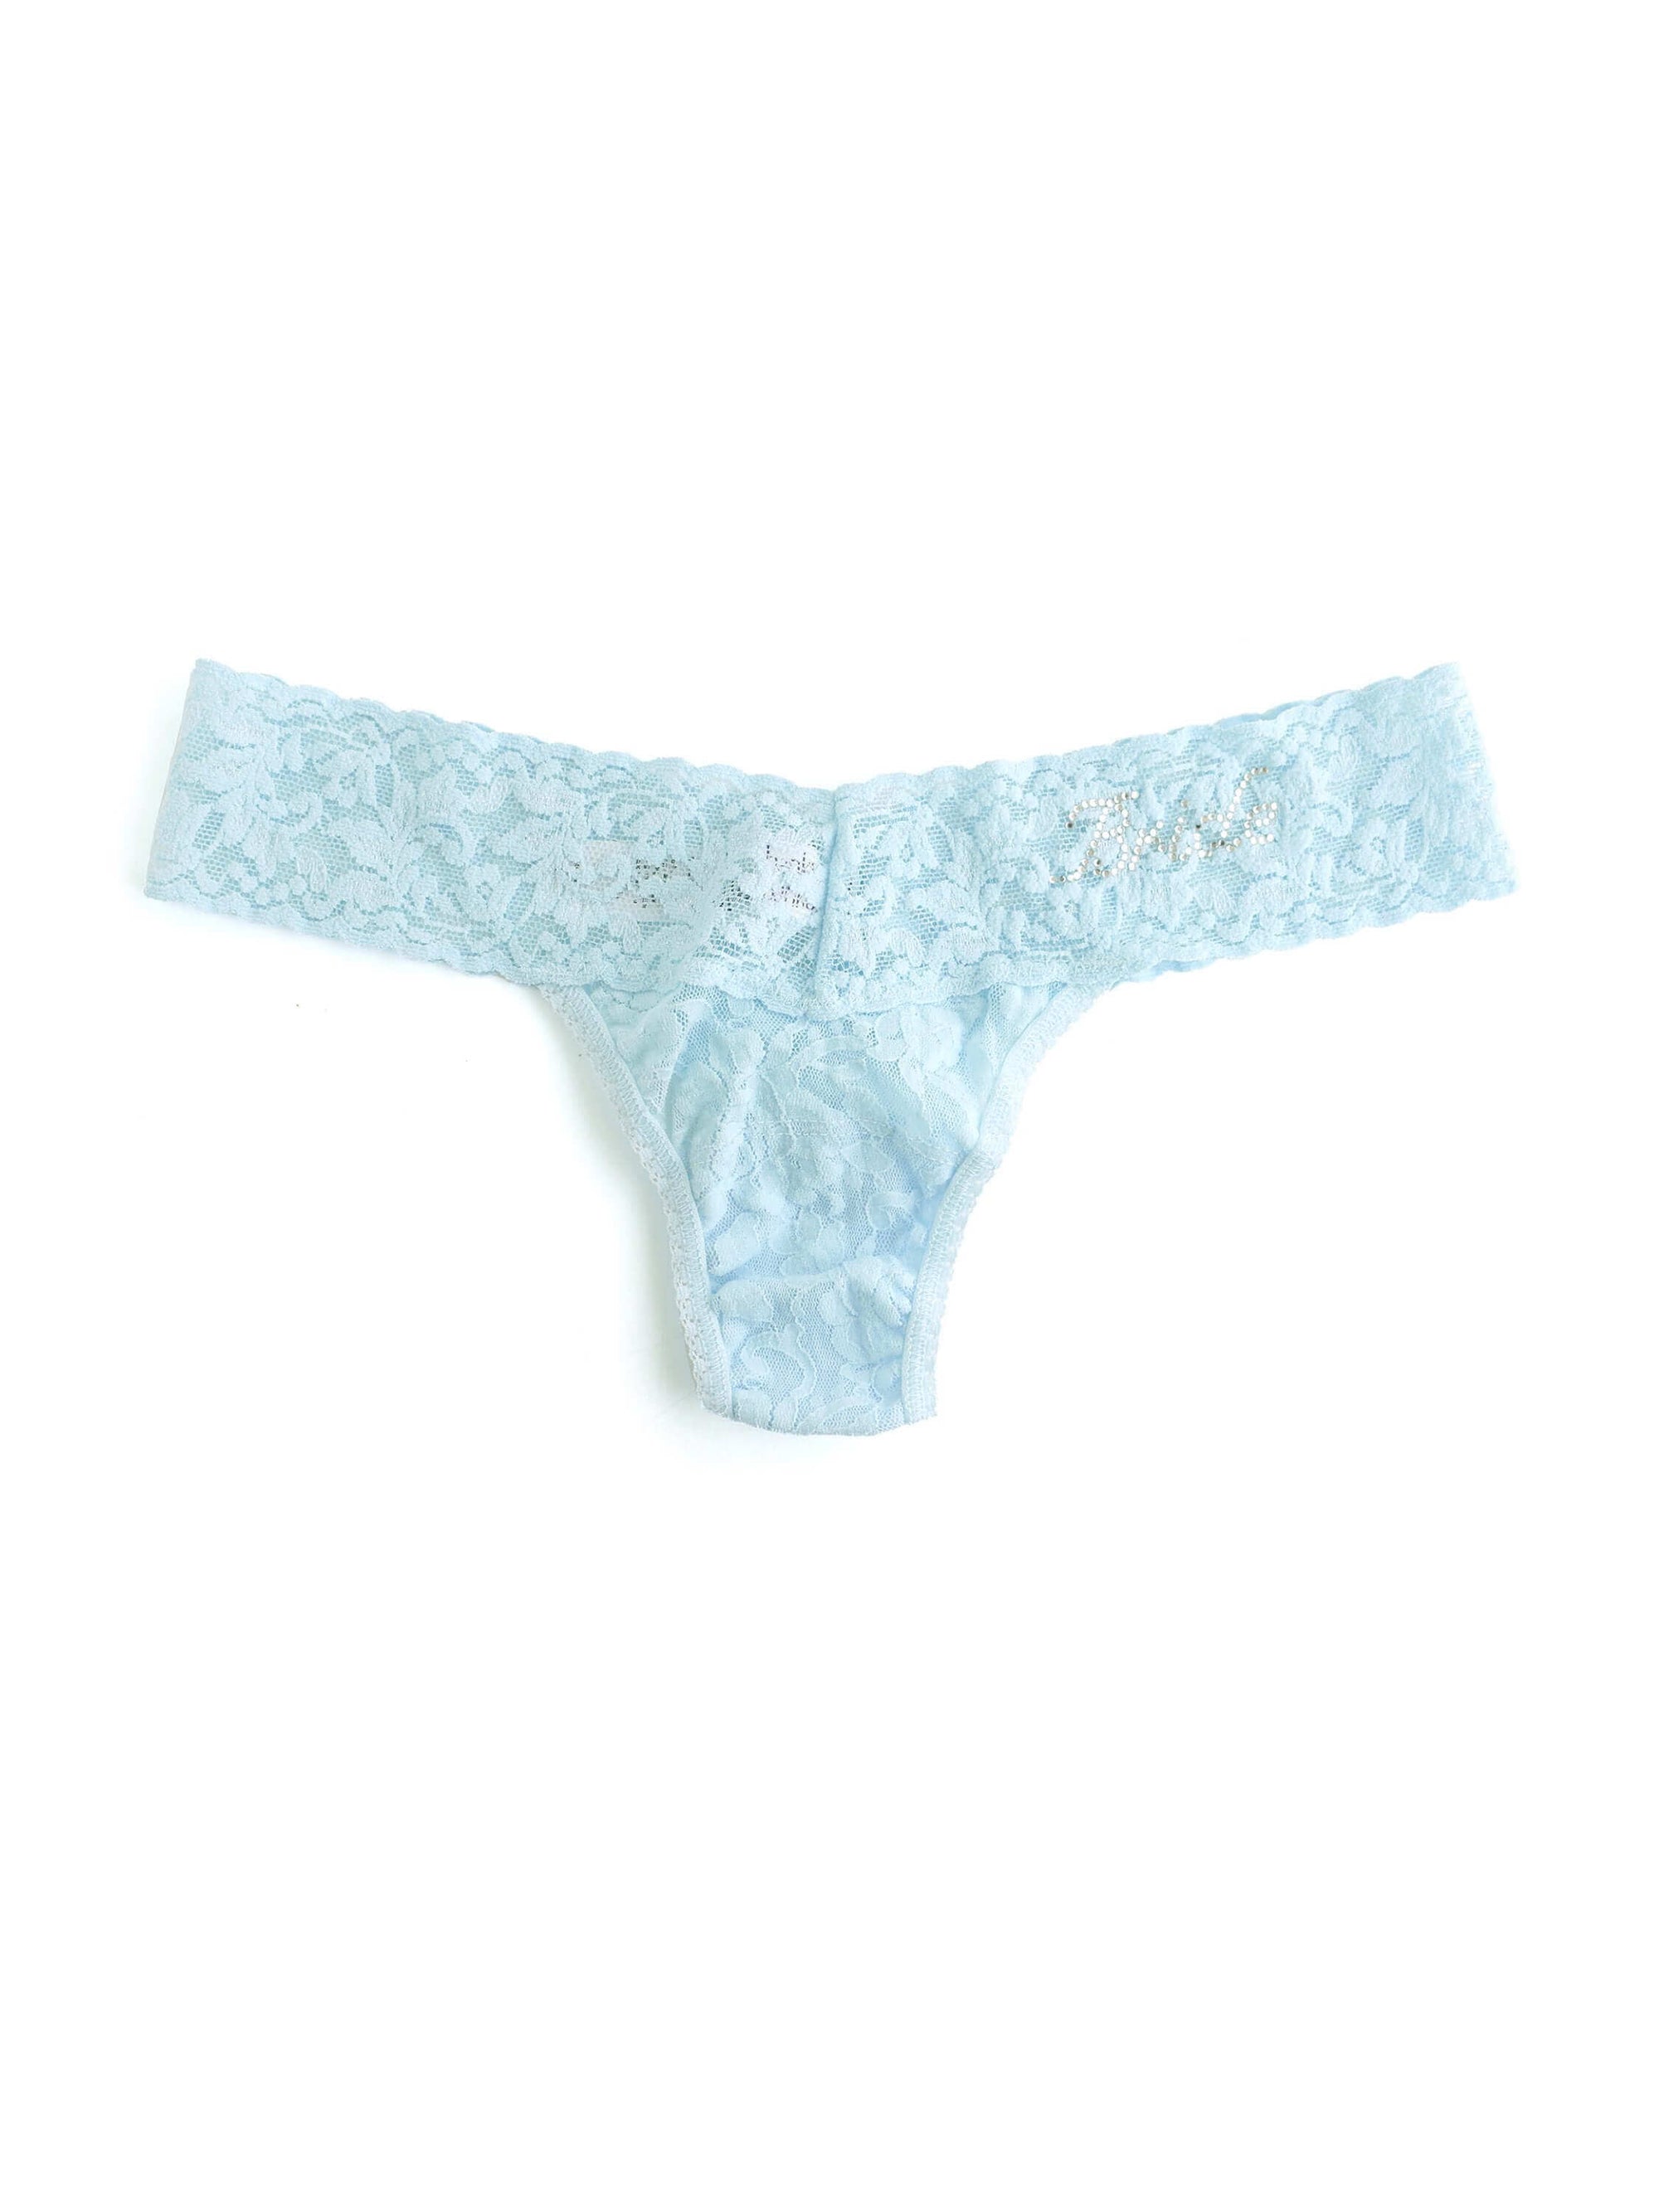 Hanky Panky &quot;Bride&quot; Low Rise Thong Color: Celeste with Clear Crystals  at Petticoat Lane  Greenwich, CT